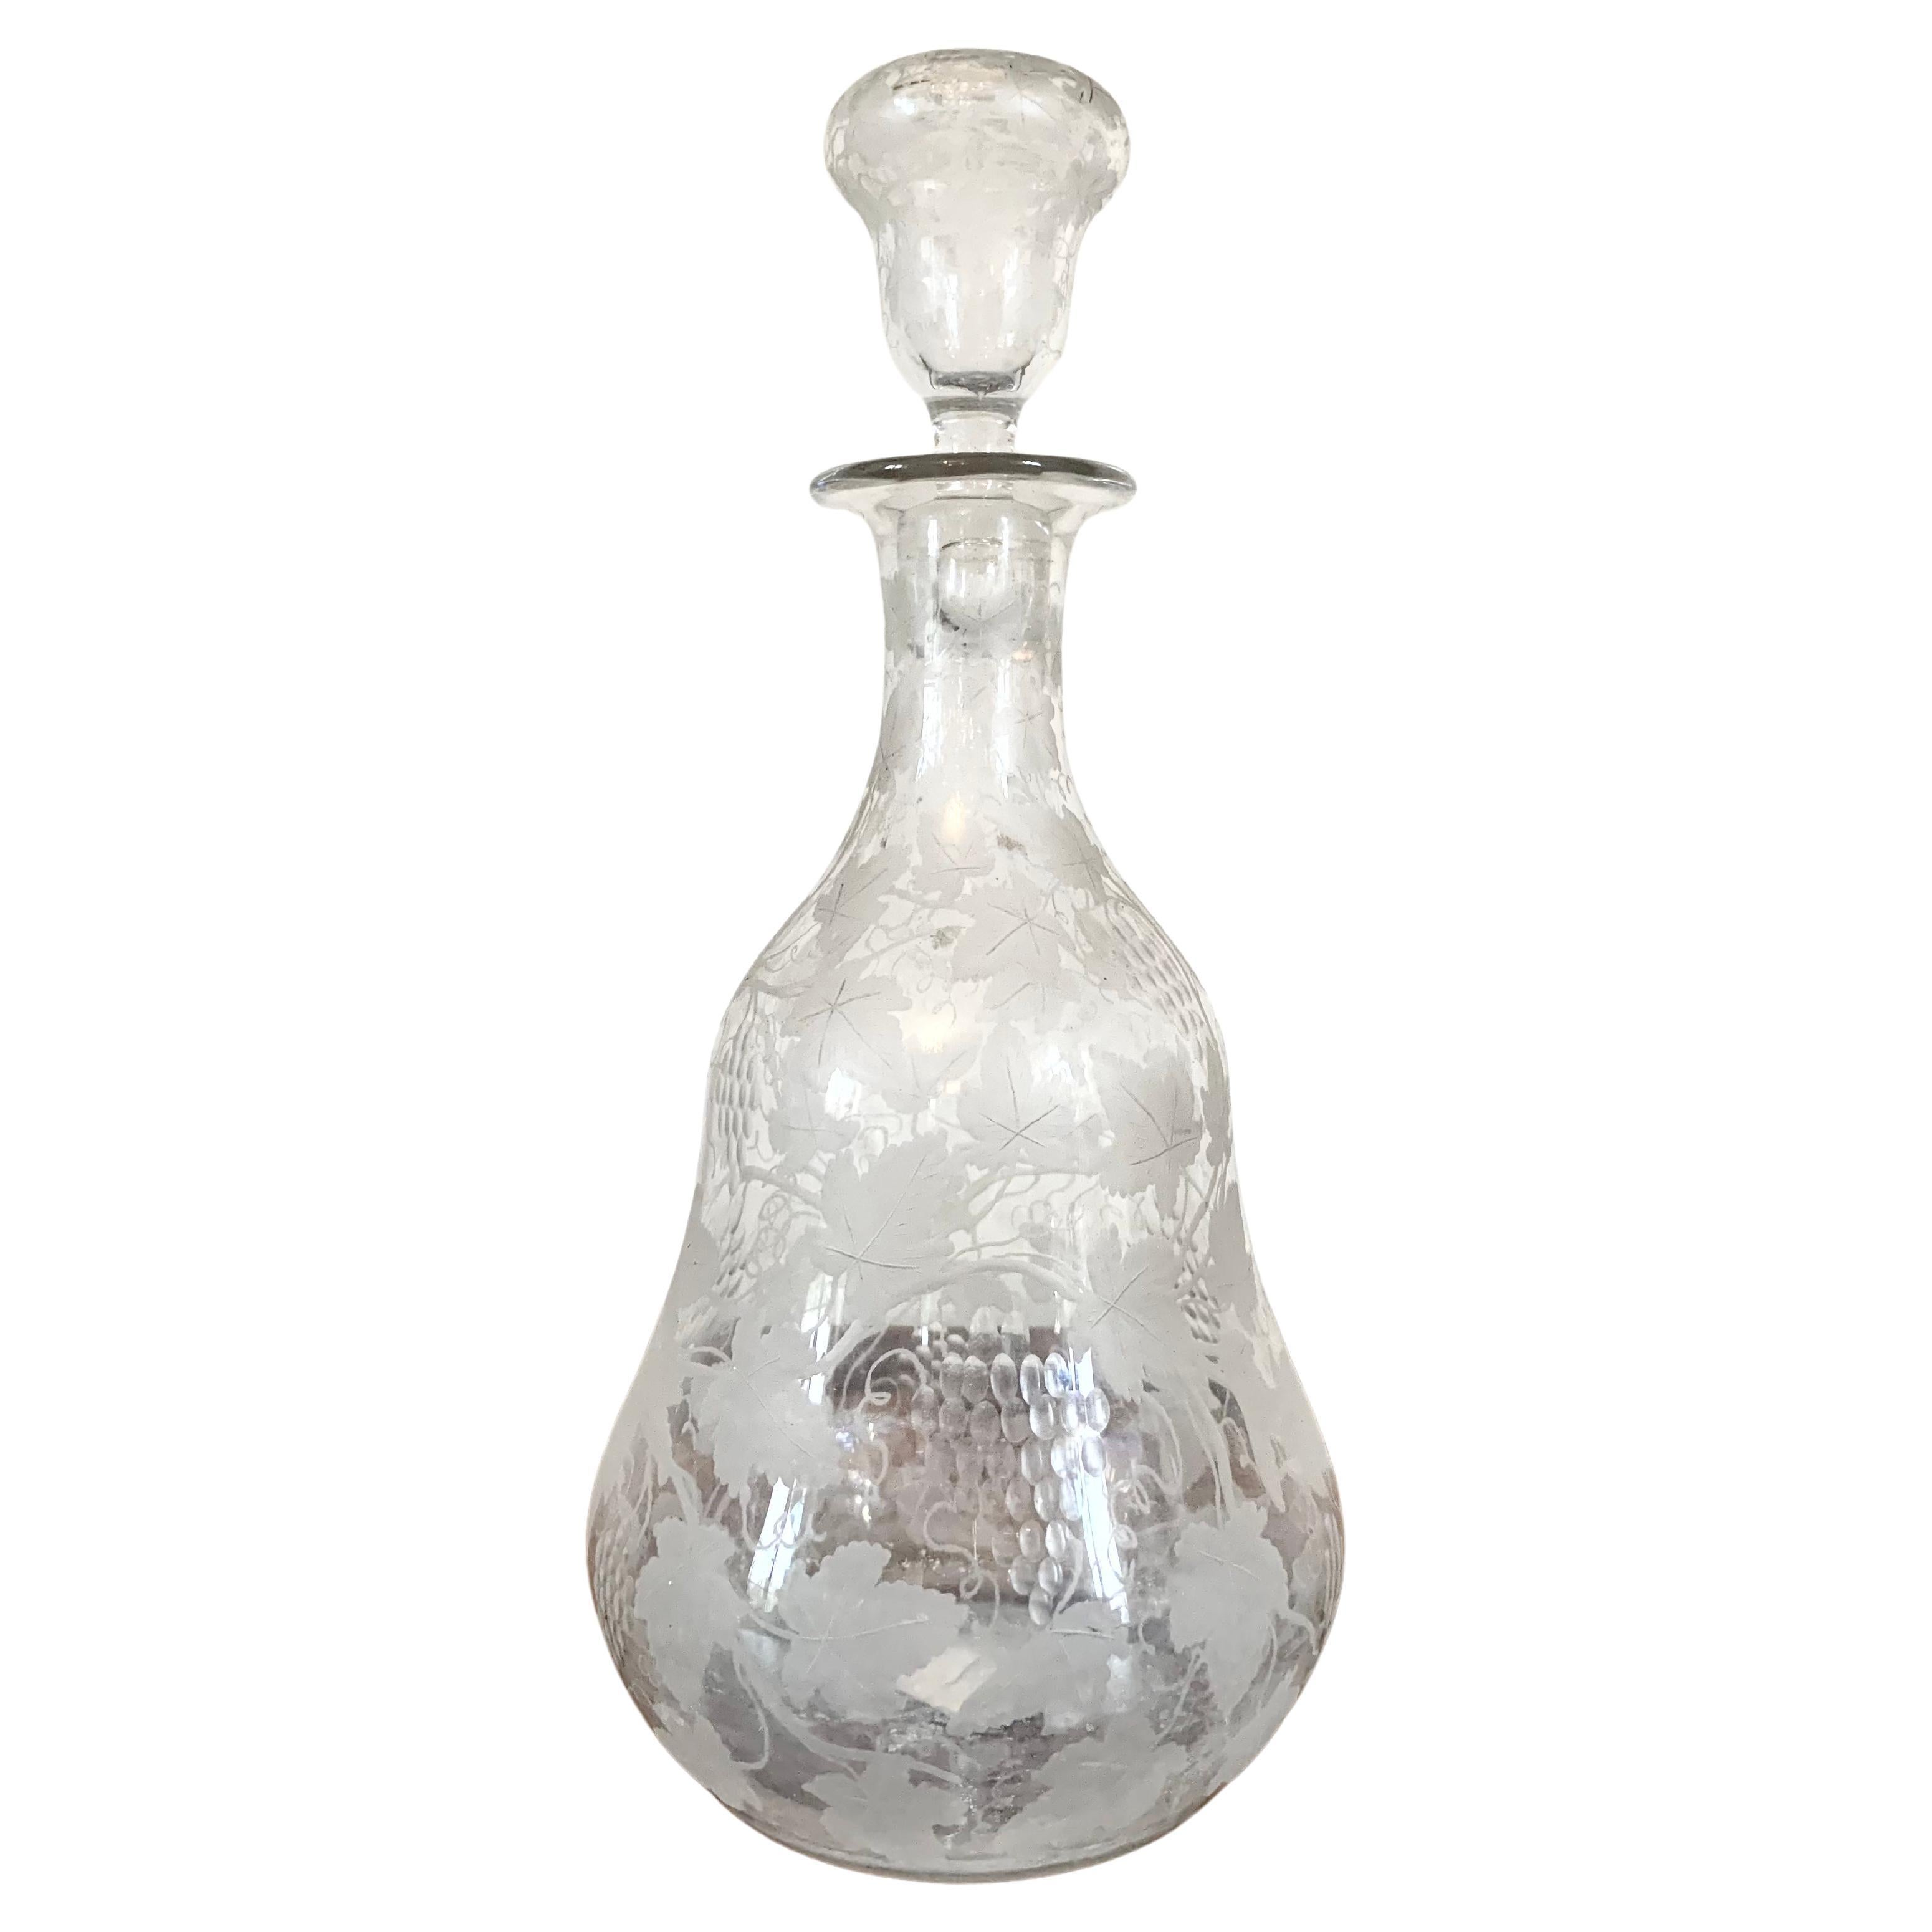  Crystal Decanter With Vine Decor Late 19th Century For Sale